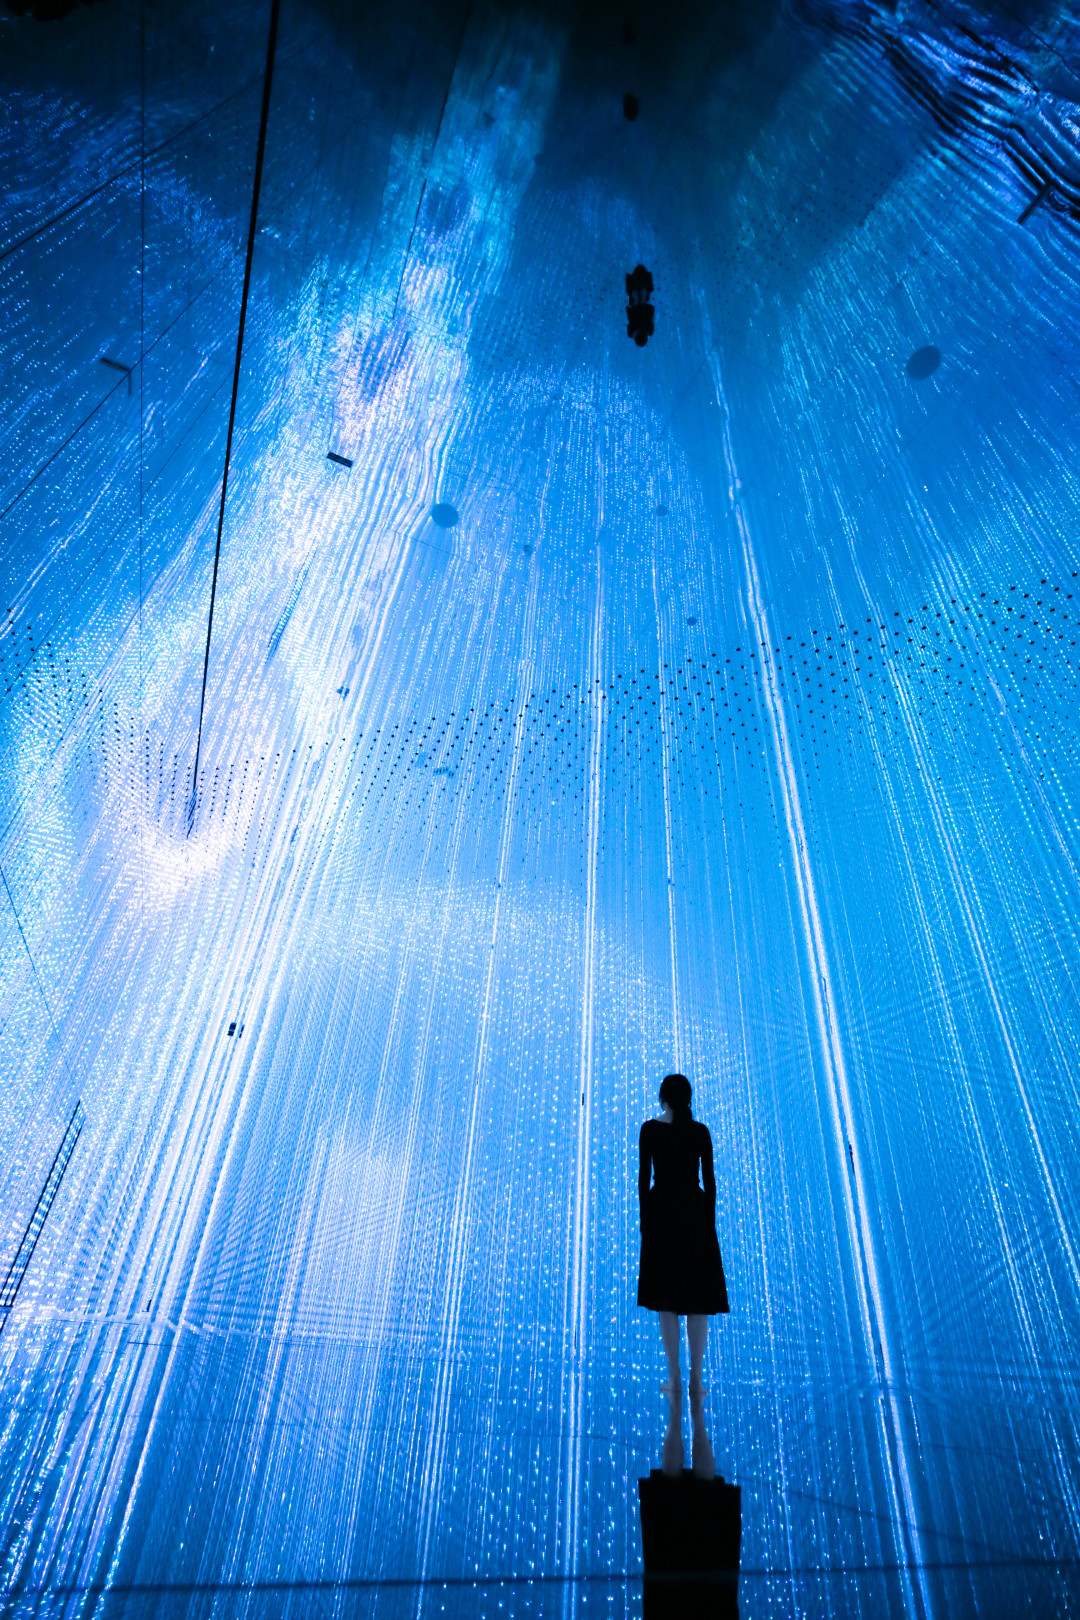 「The Infinite Crystal Universe」teamLab, 2018, Interactive Installation of Light Sculpture, LED, Endless, Sound: teamLab